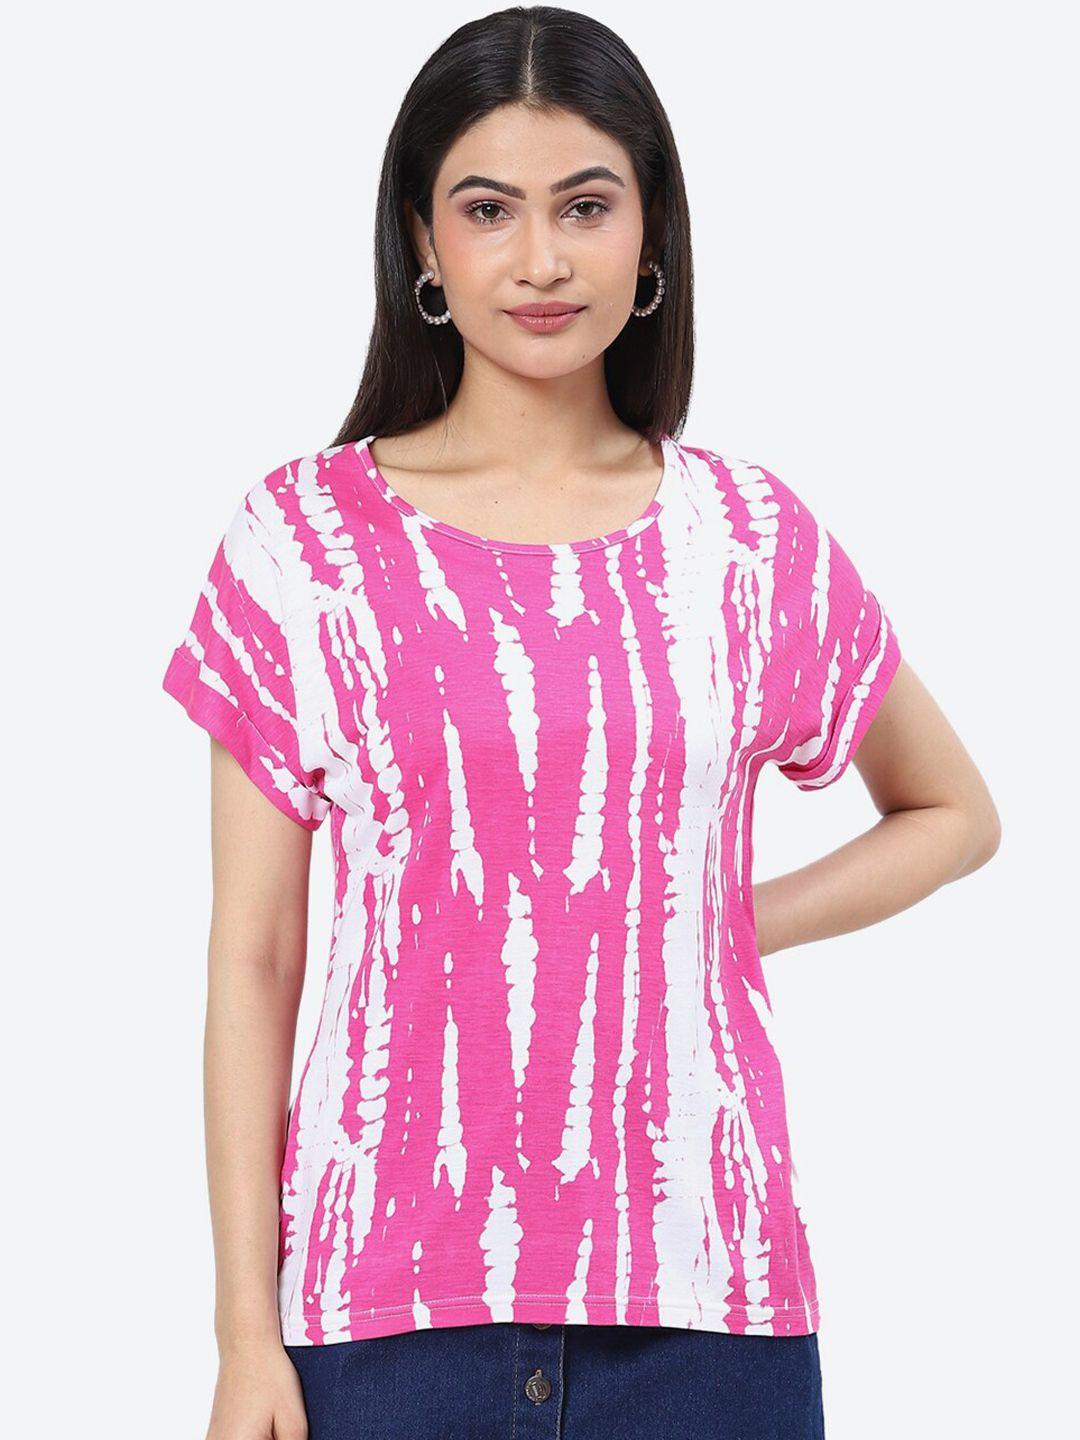 2bme abstract printed extended sleeves cotton t-shirt